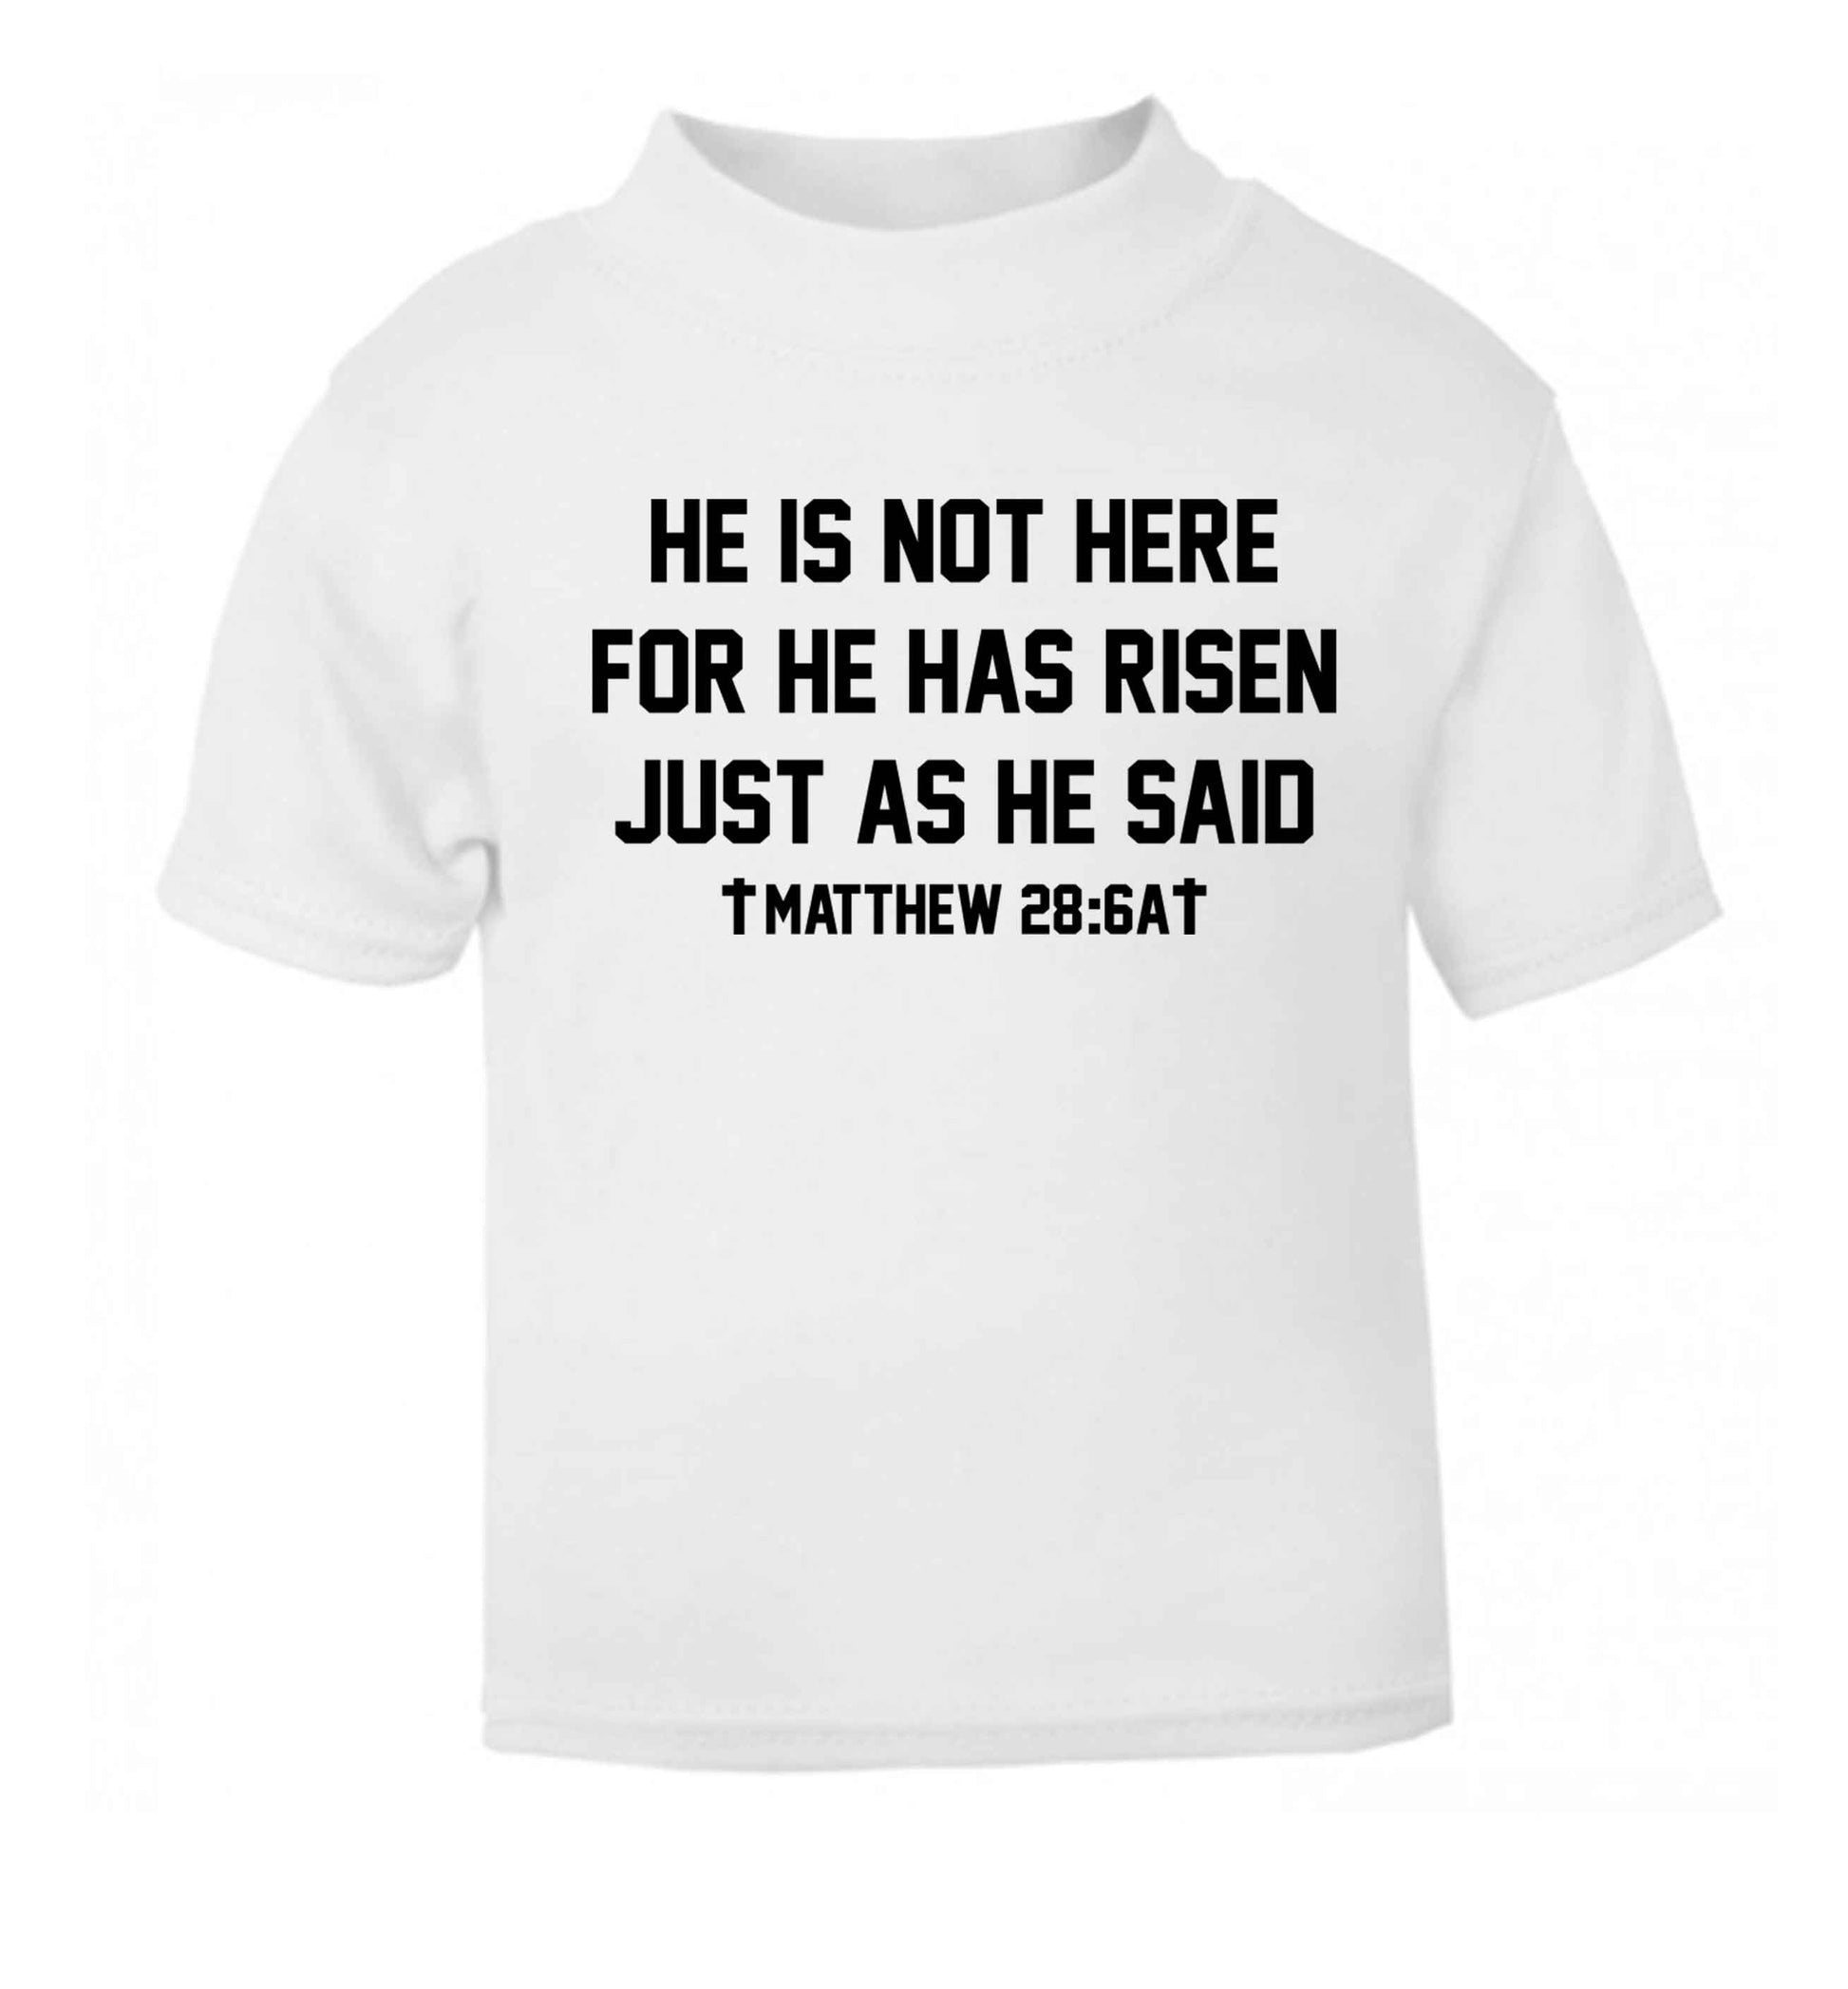 He is not here for he has risen just as he said matthew 28:6A white baby toddler Tshirt 2 Years